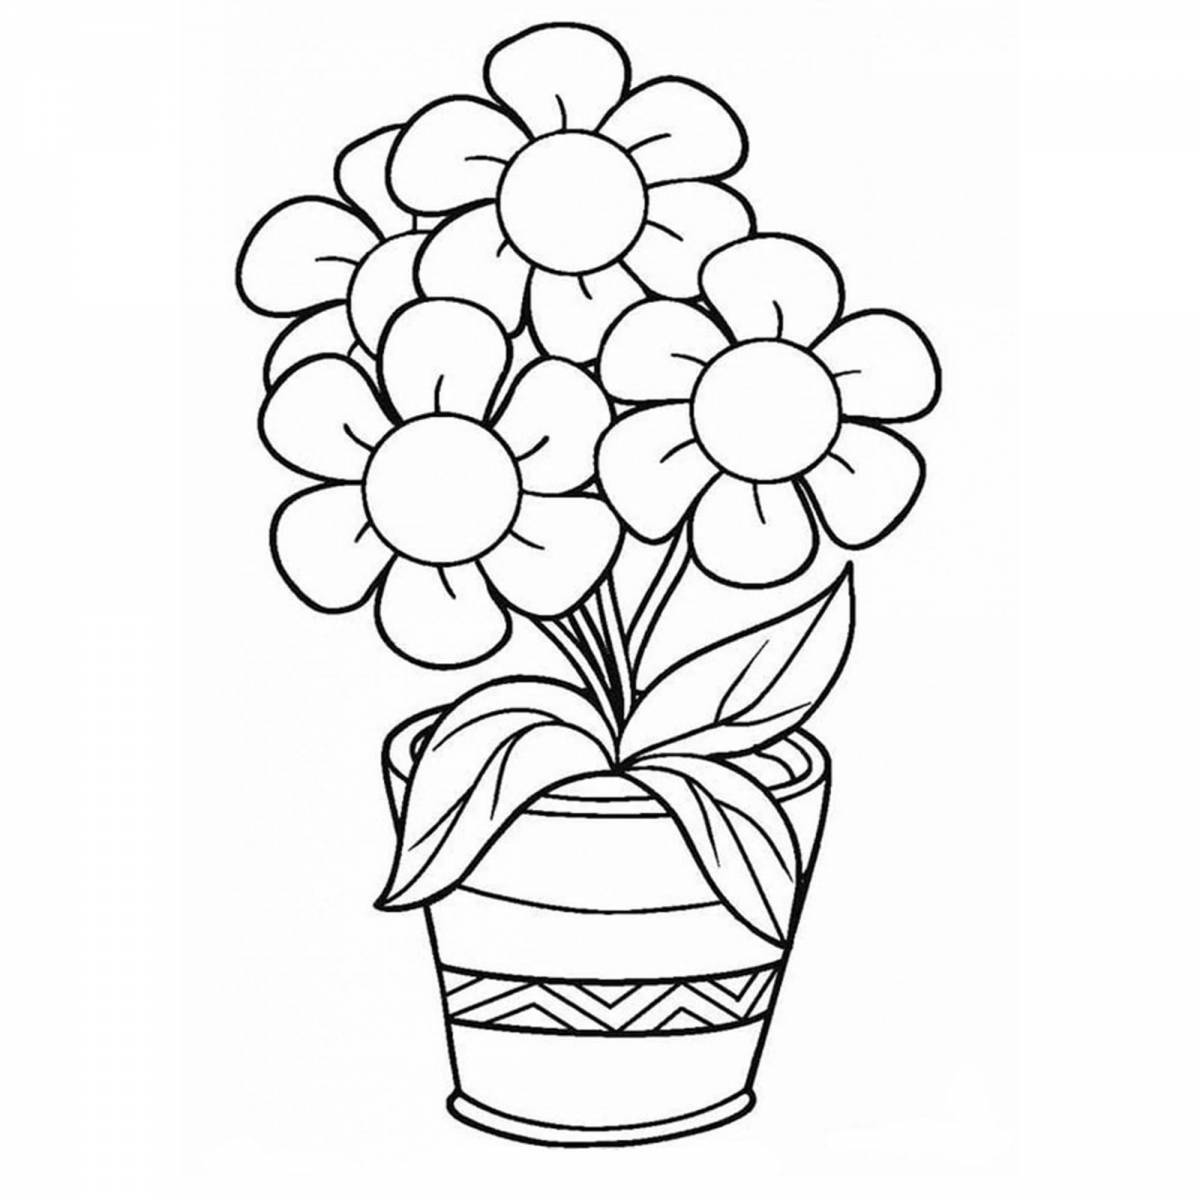 Exotic flowers coloring pages for kids